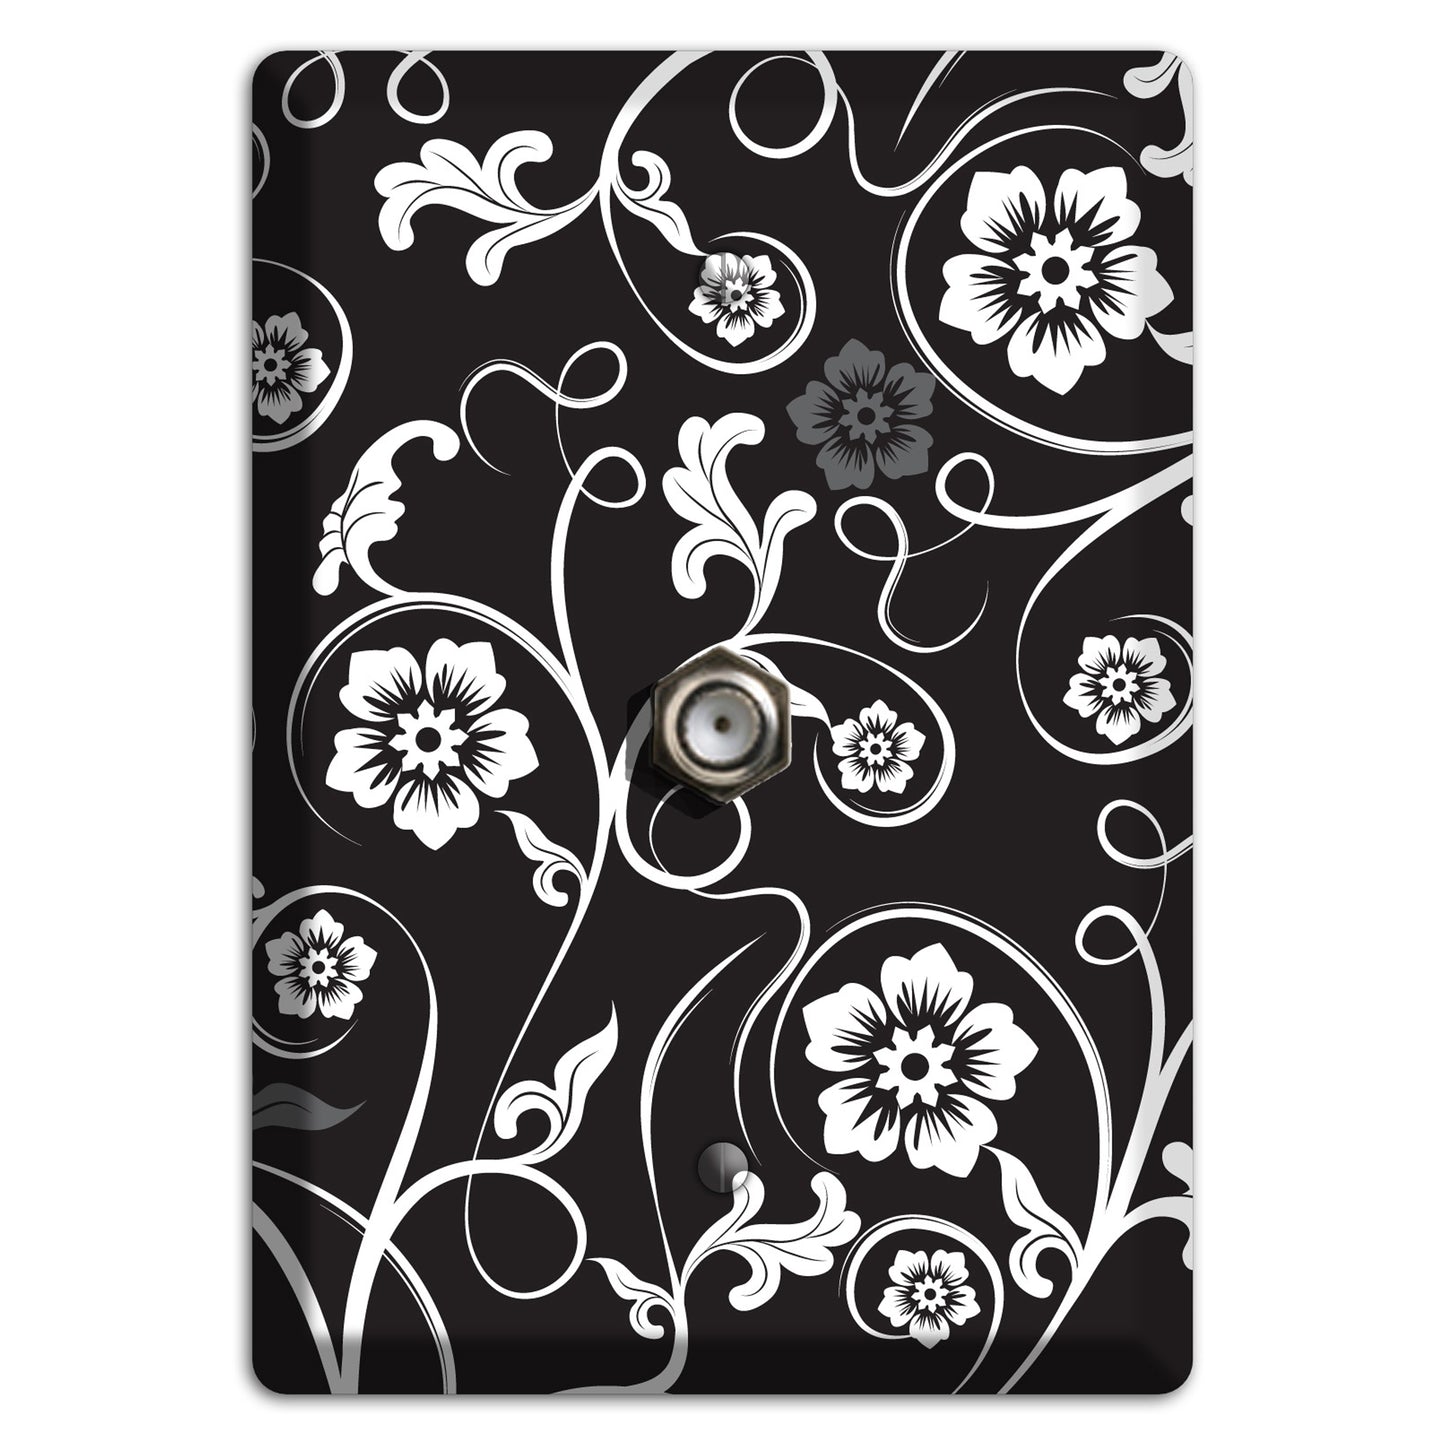 Black with White Flower Sprig Cable Wallplate